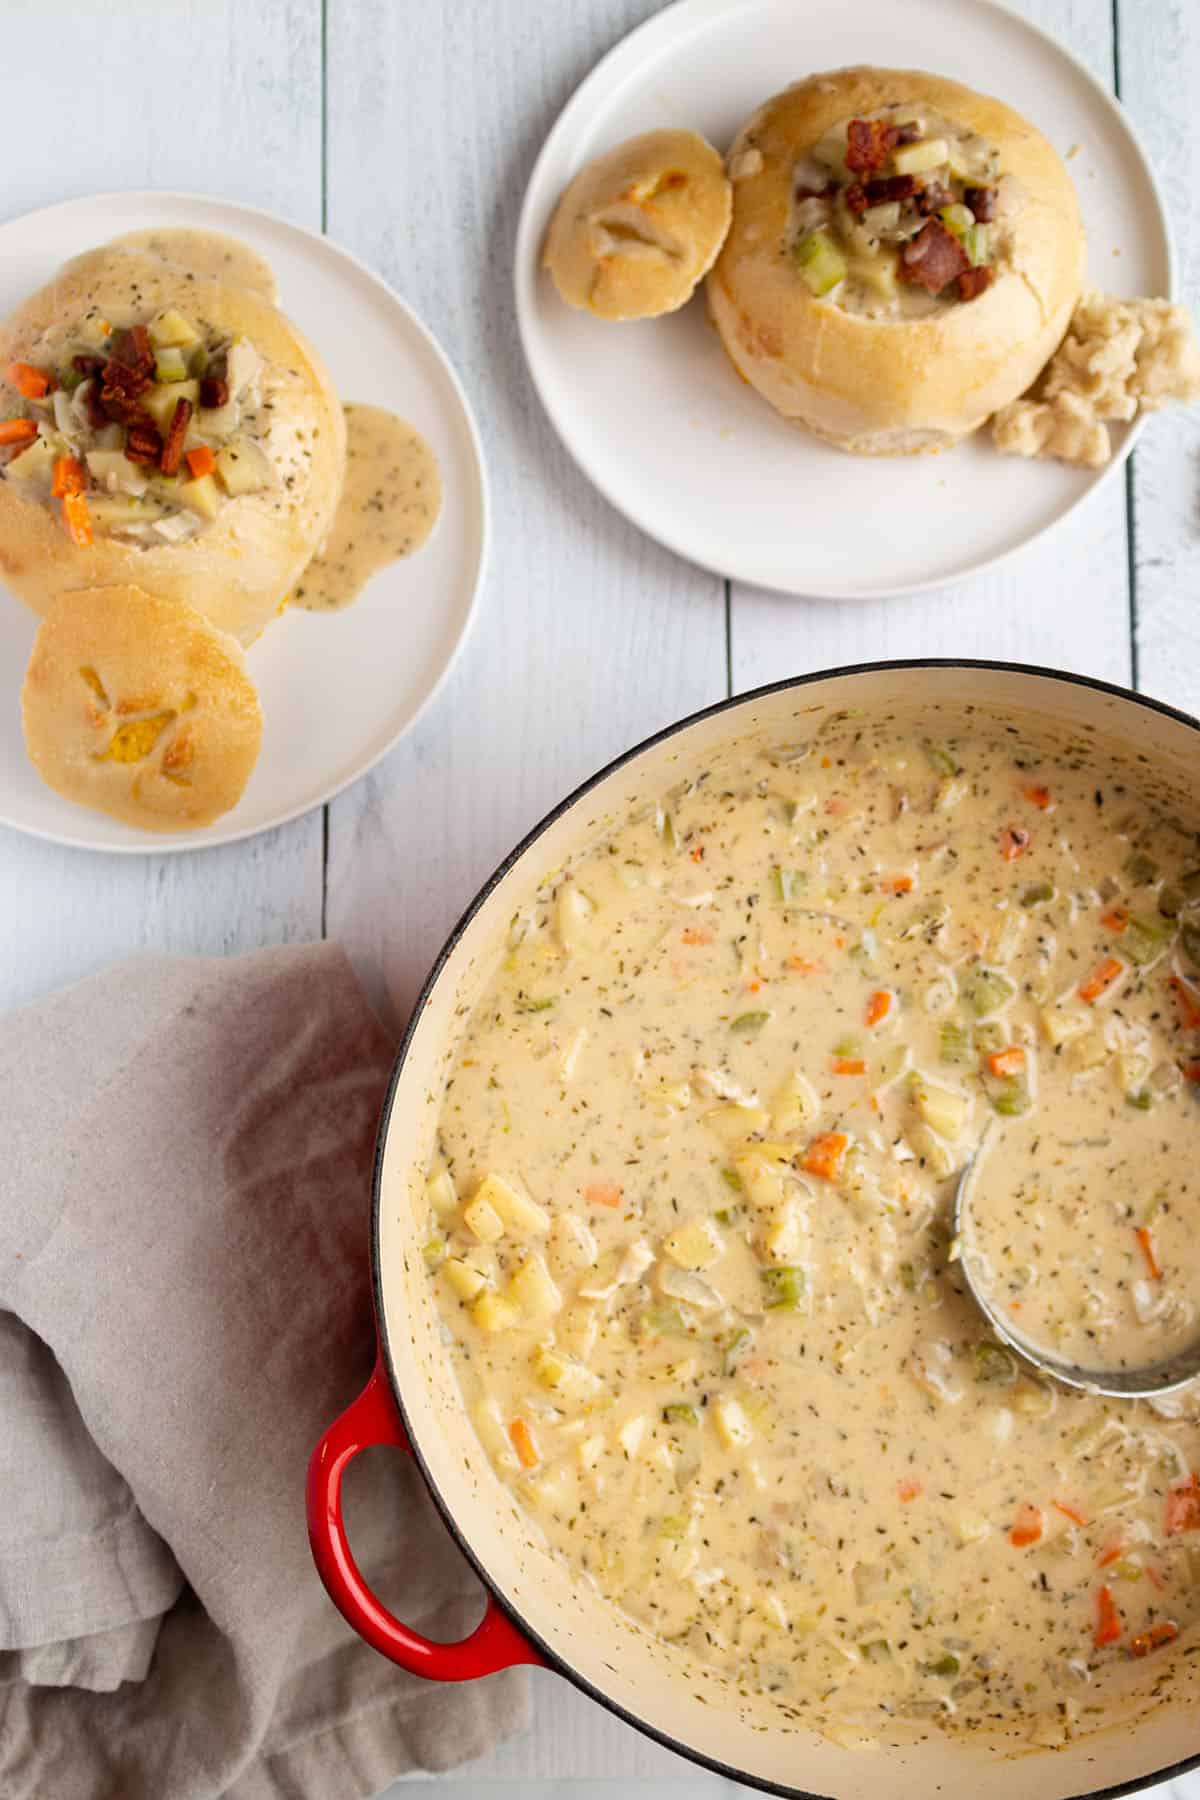 A large soup pot with a creamy clam chowder and two plates with sourdough bread bowls.